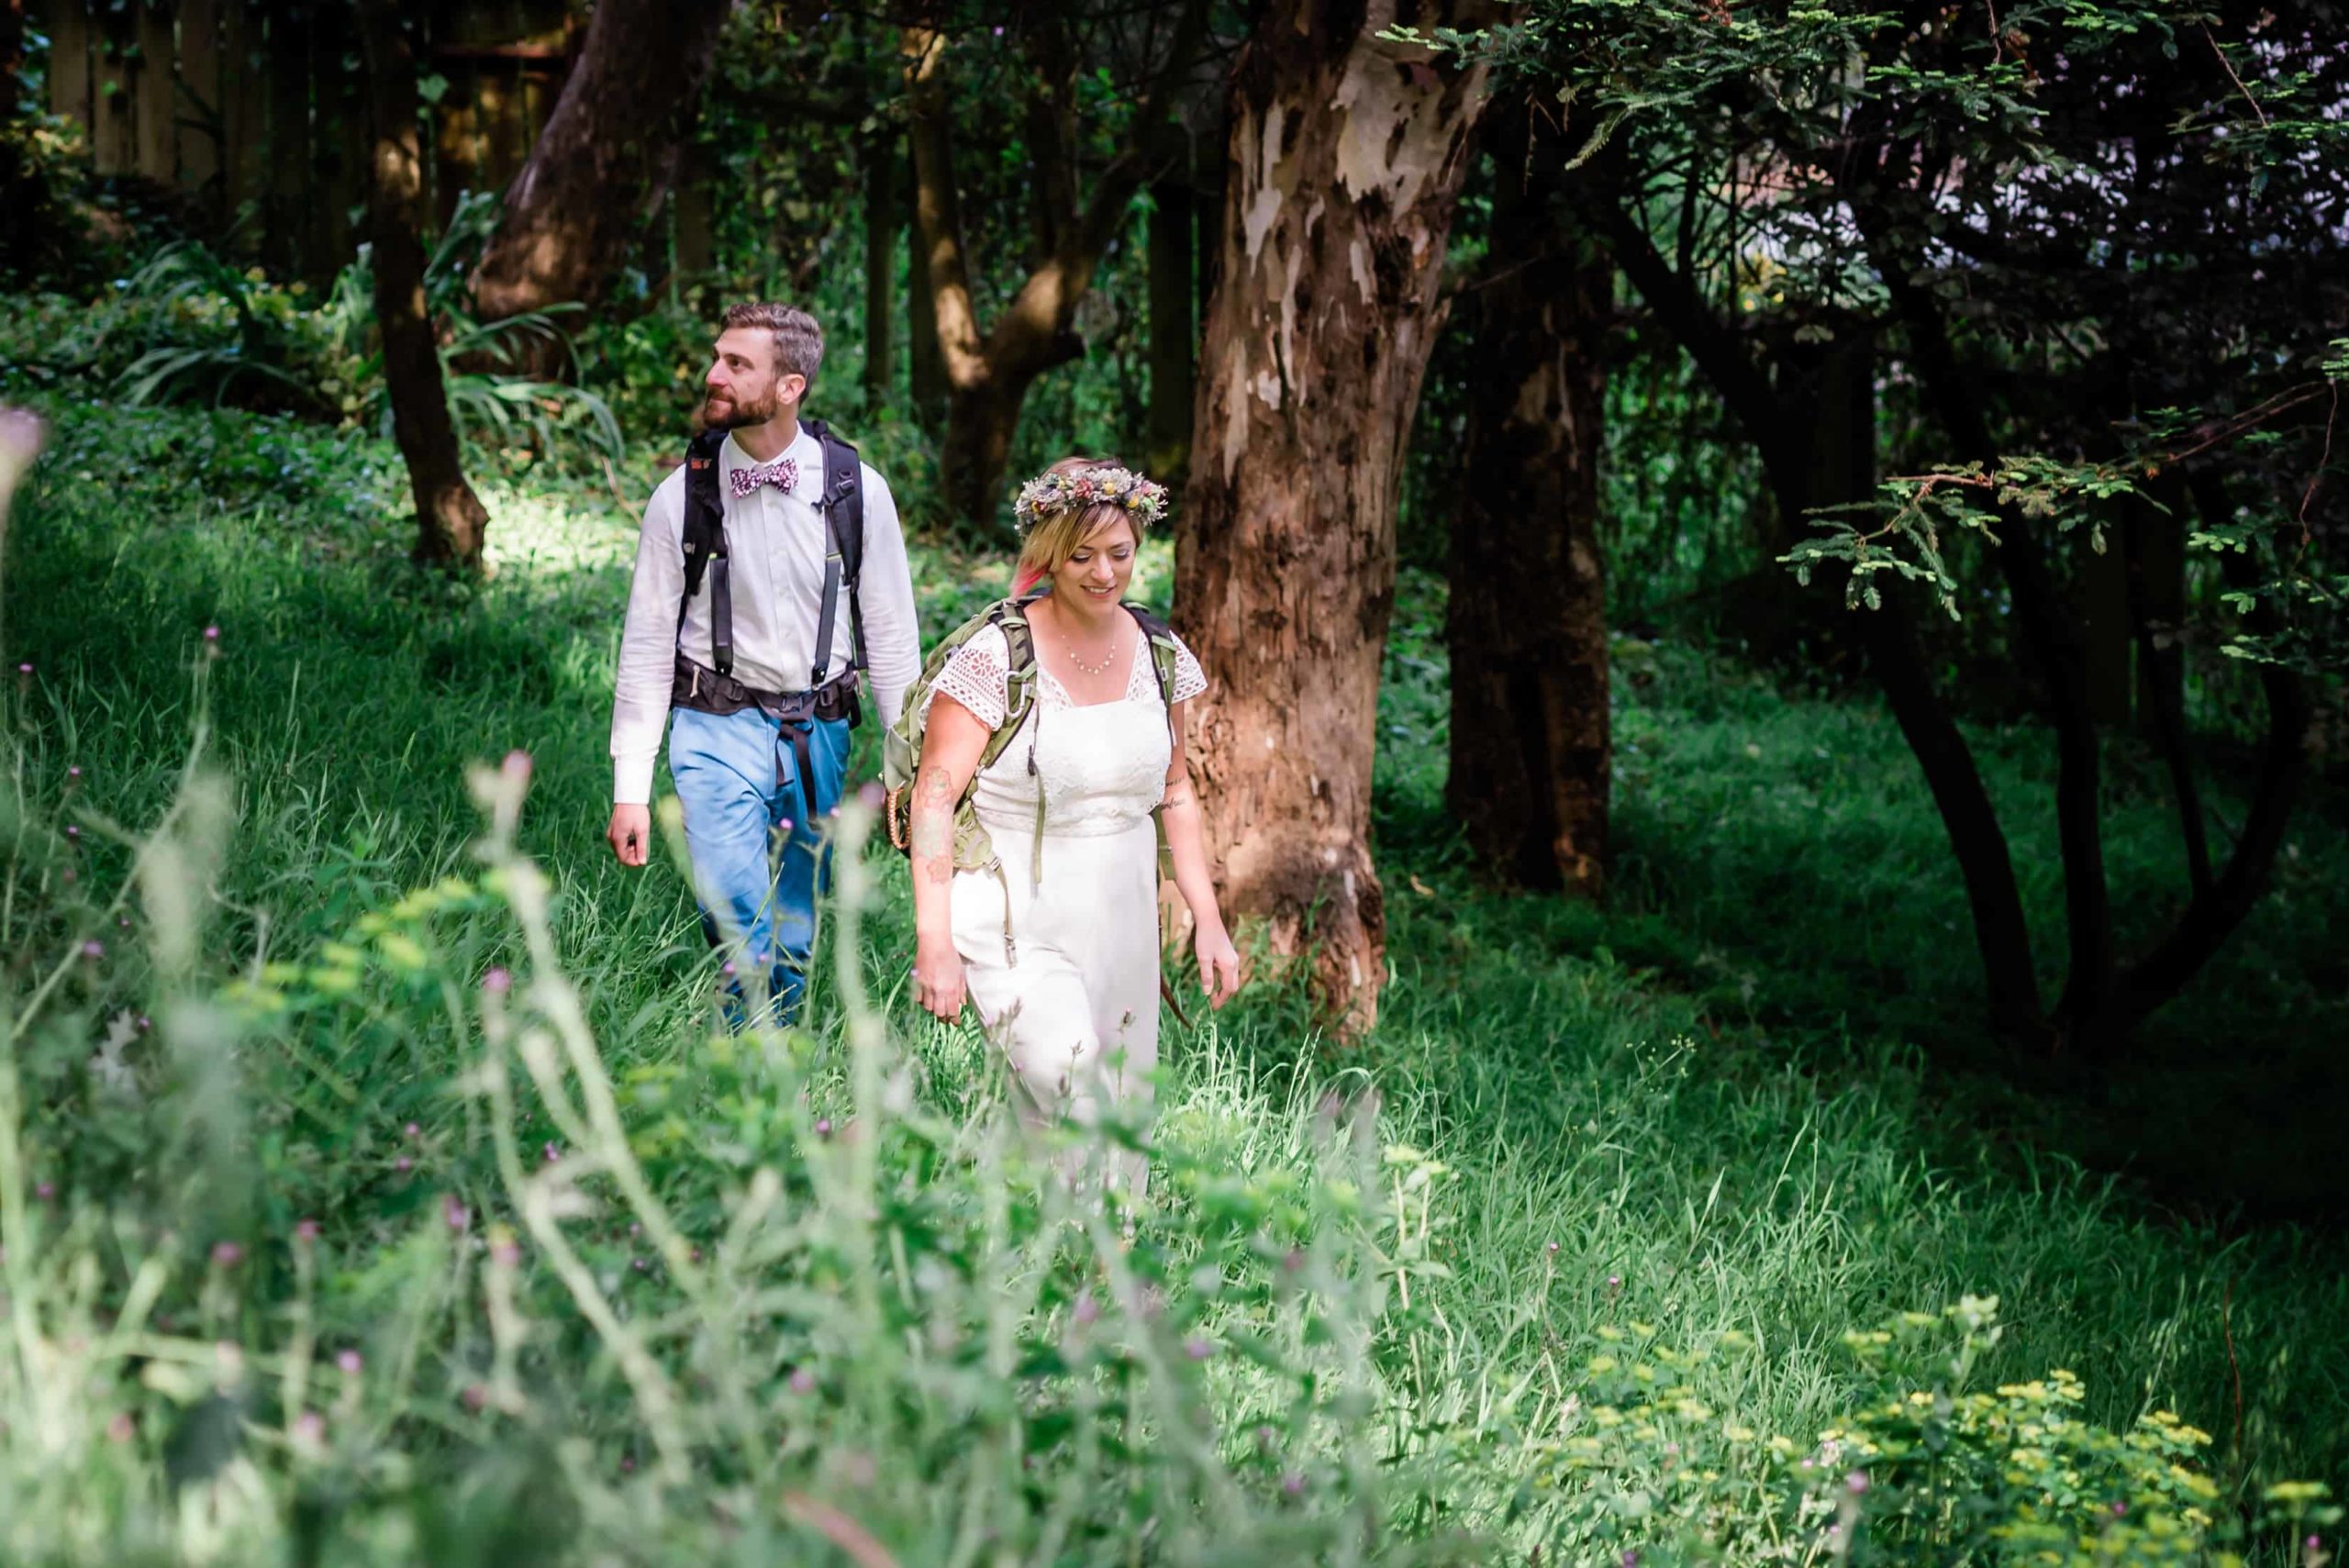 Couple walks through the woods in their elopement attire with backpacks on, admiring the scenery.